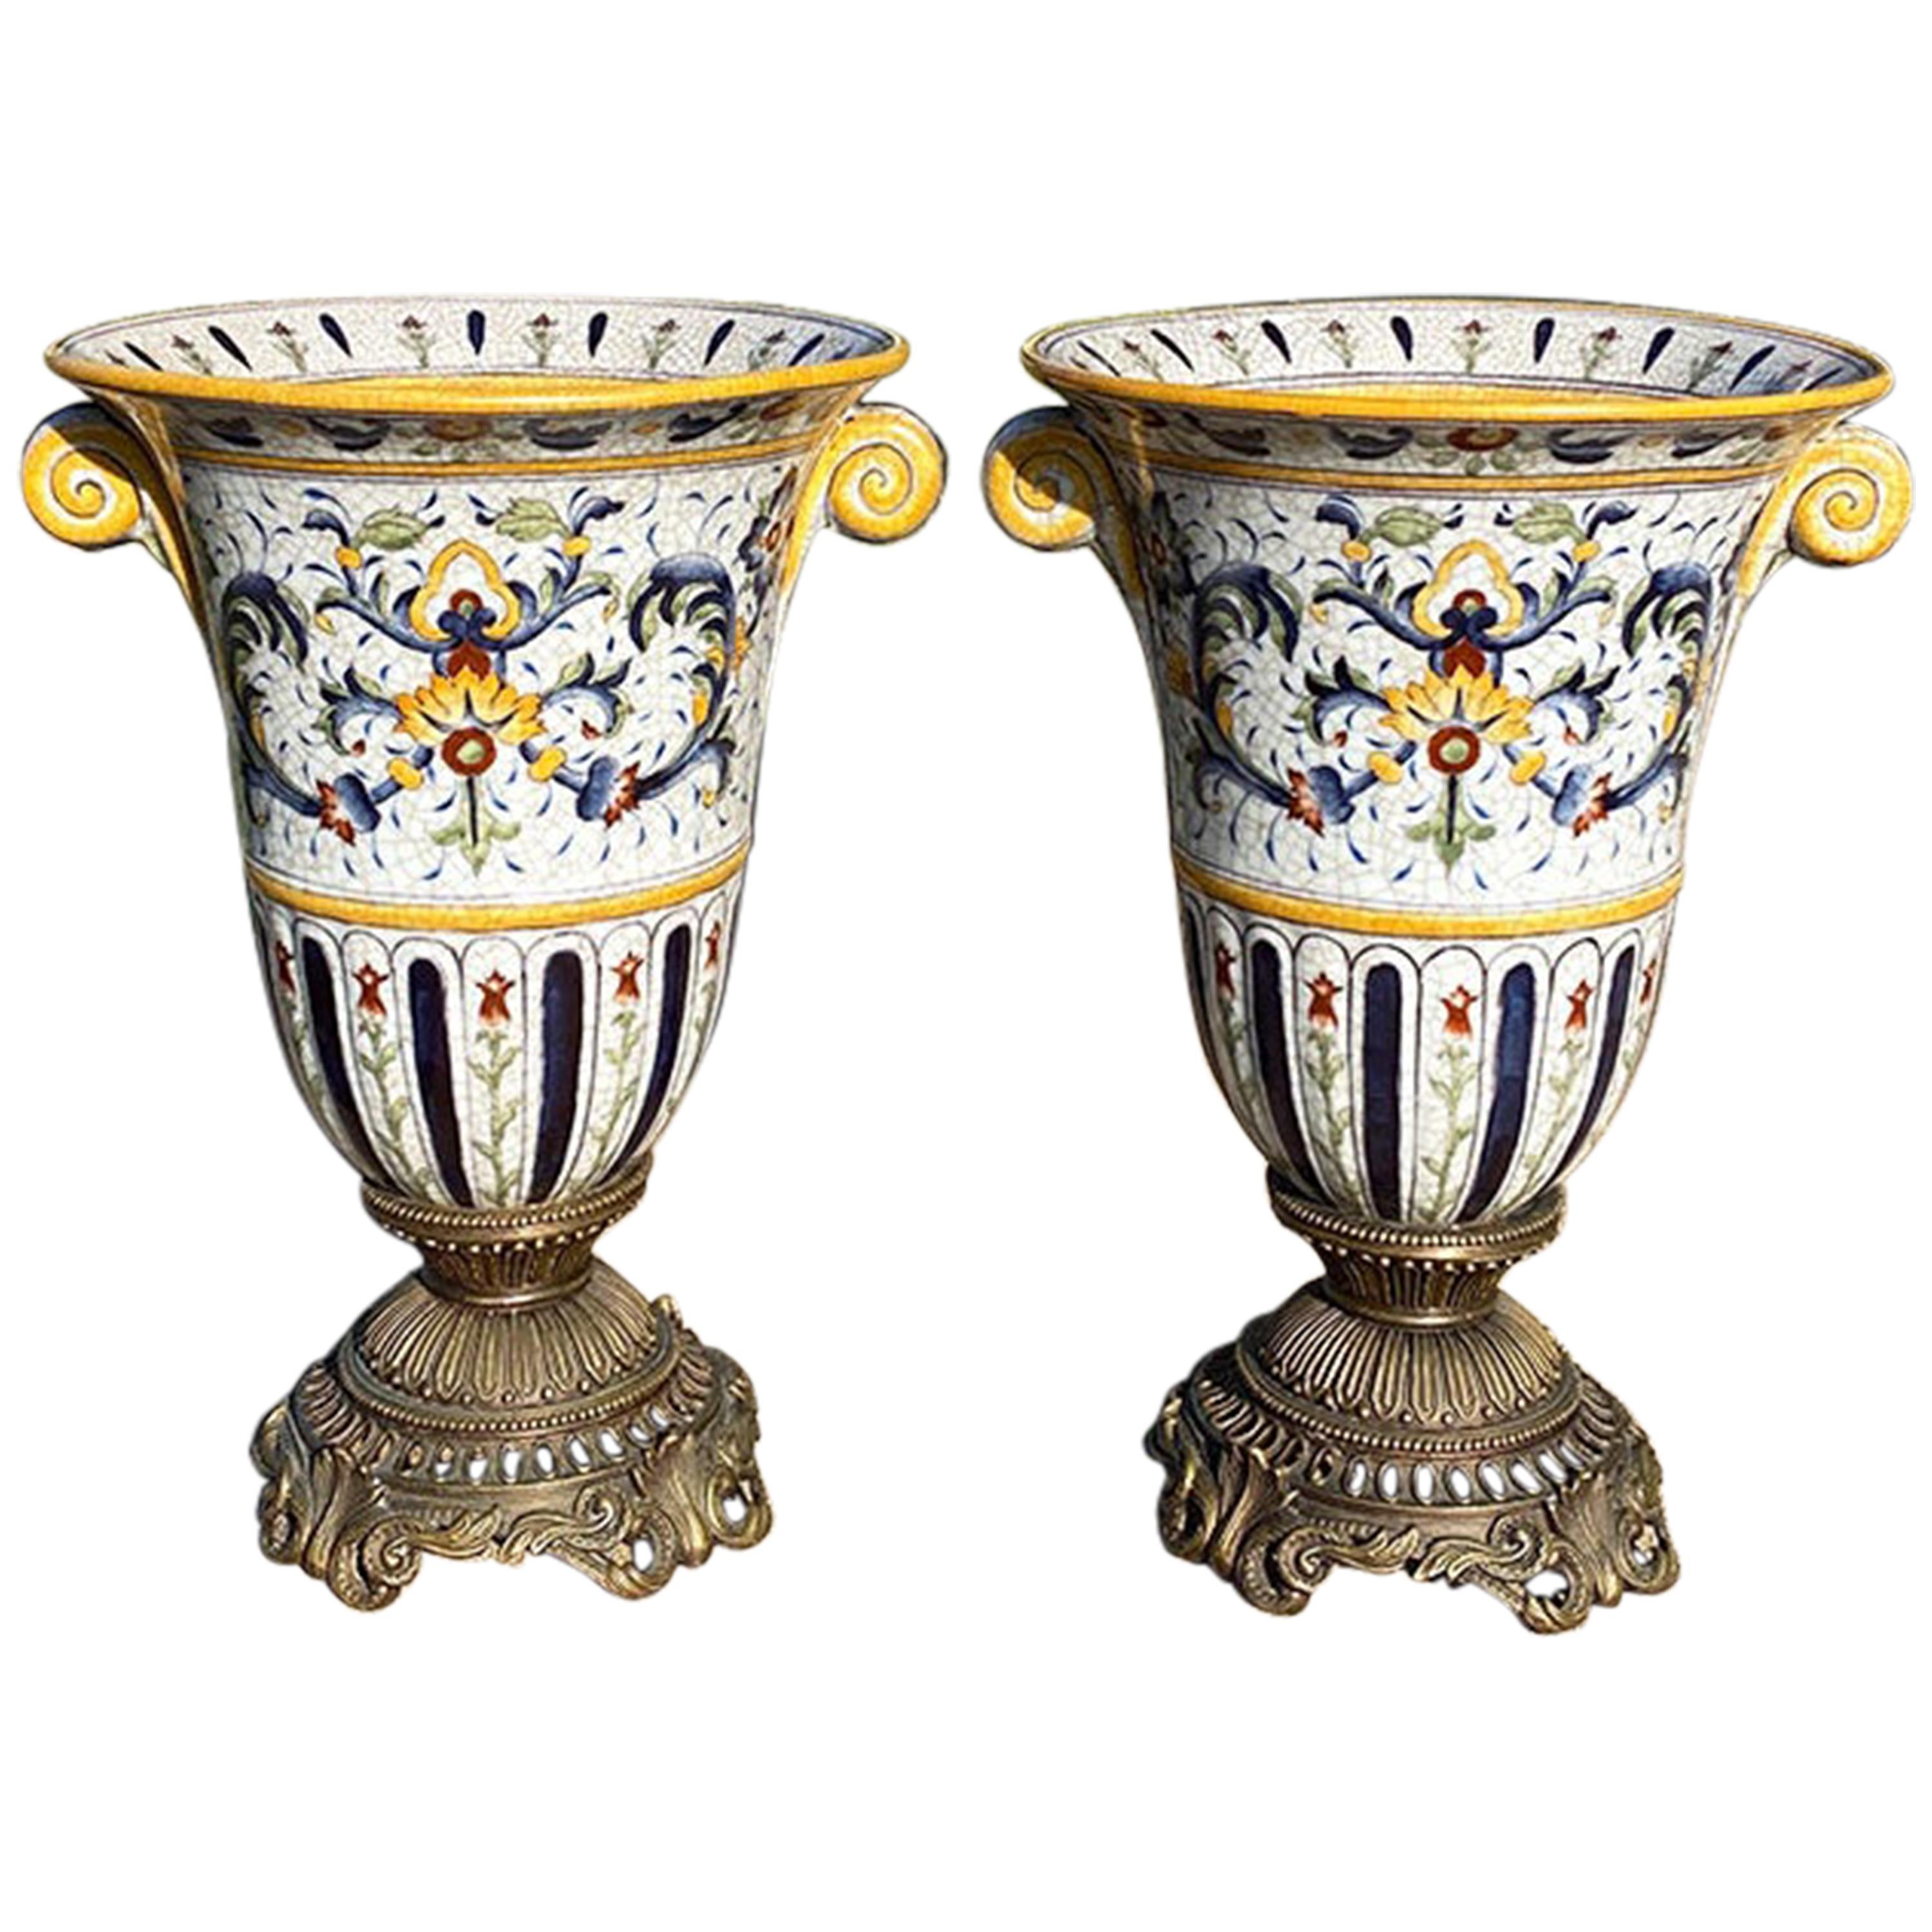 Pair of Monumental Mounted Ceramic Painted Craquelure Mounted Urns, Signed